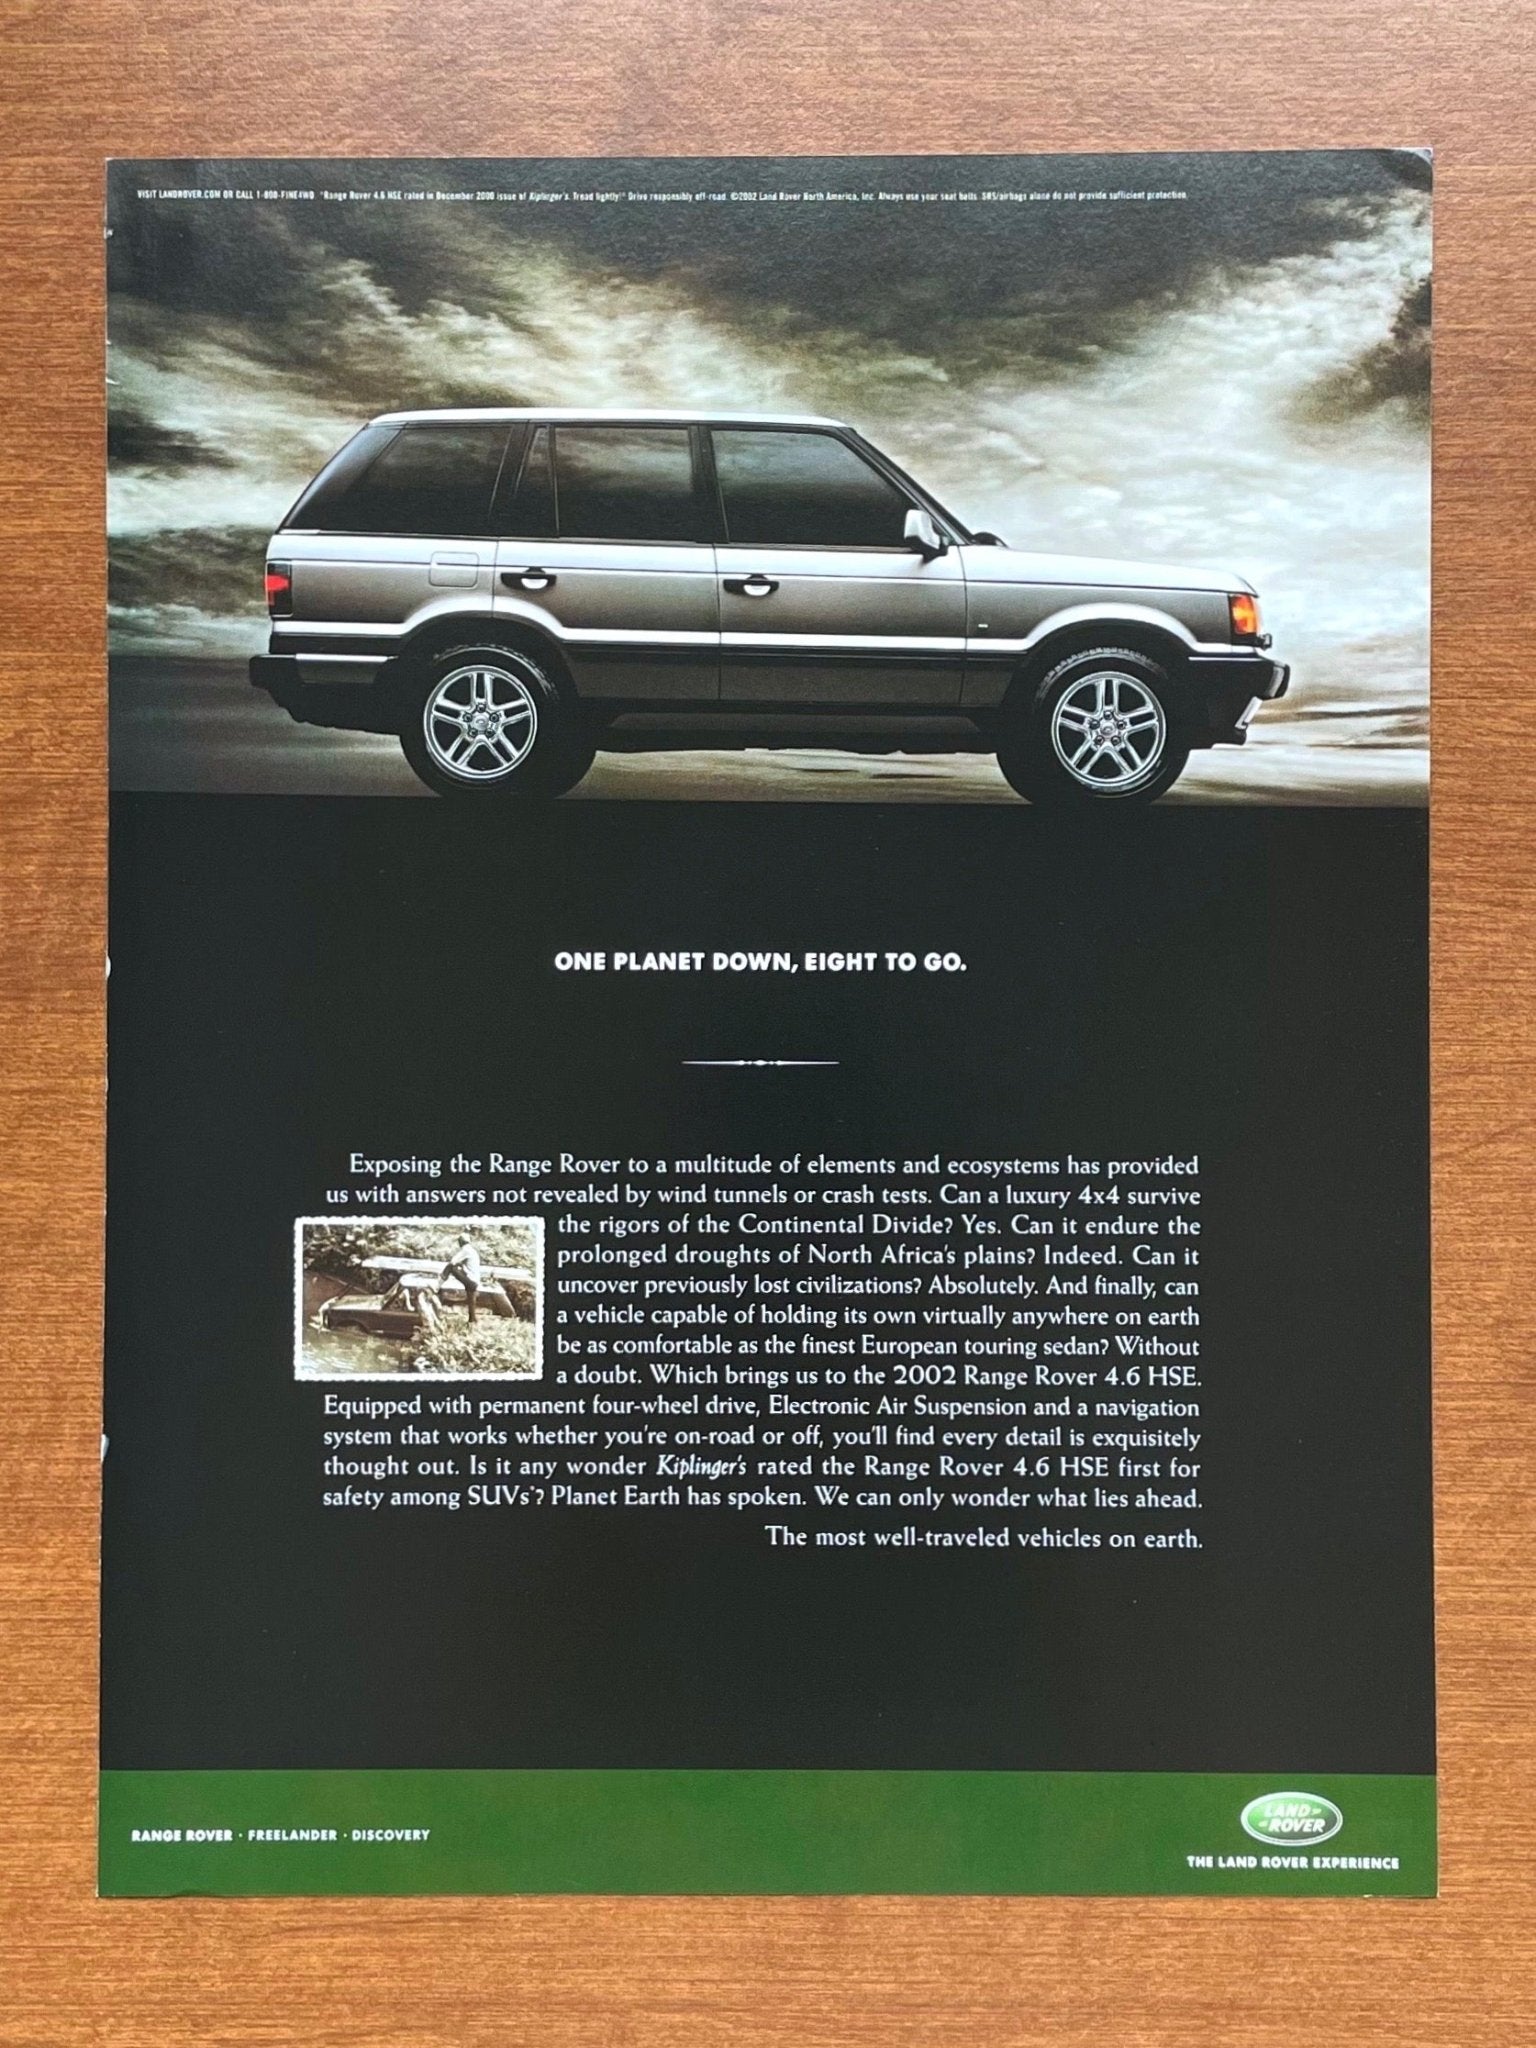 2002 Range Rover 4.6 HSE "One planet down, eight to go." Advertisement